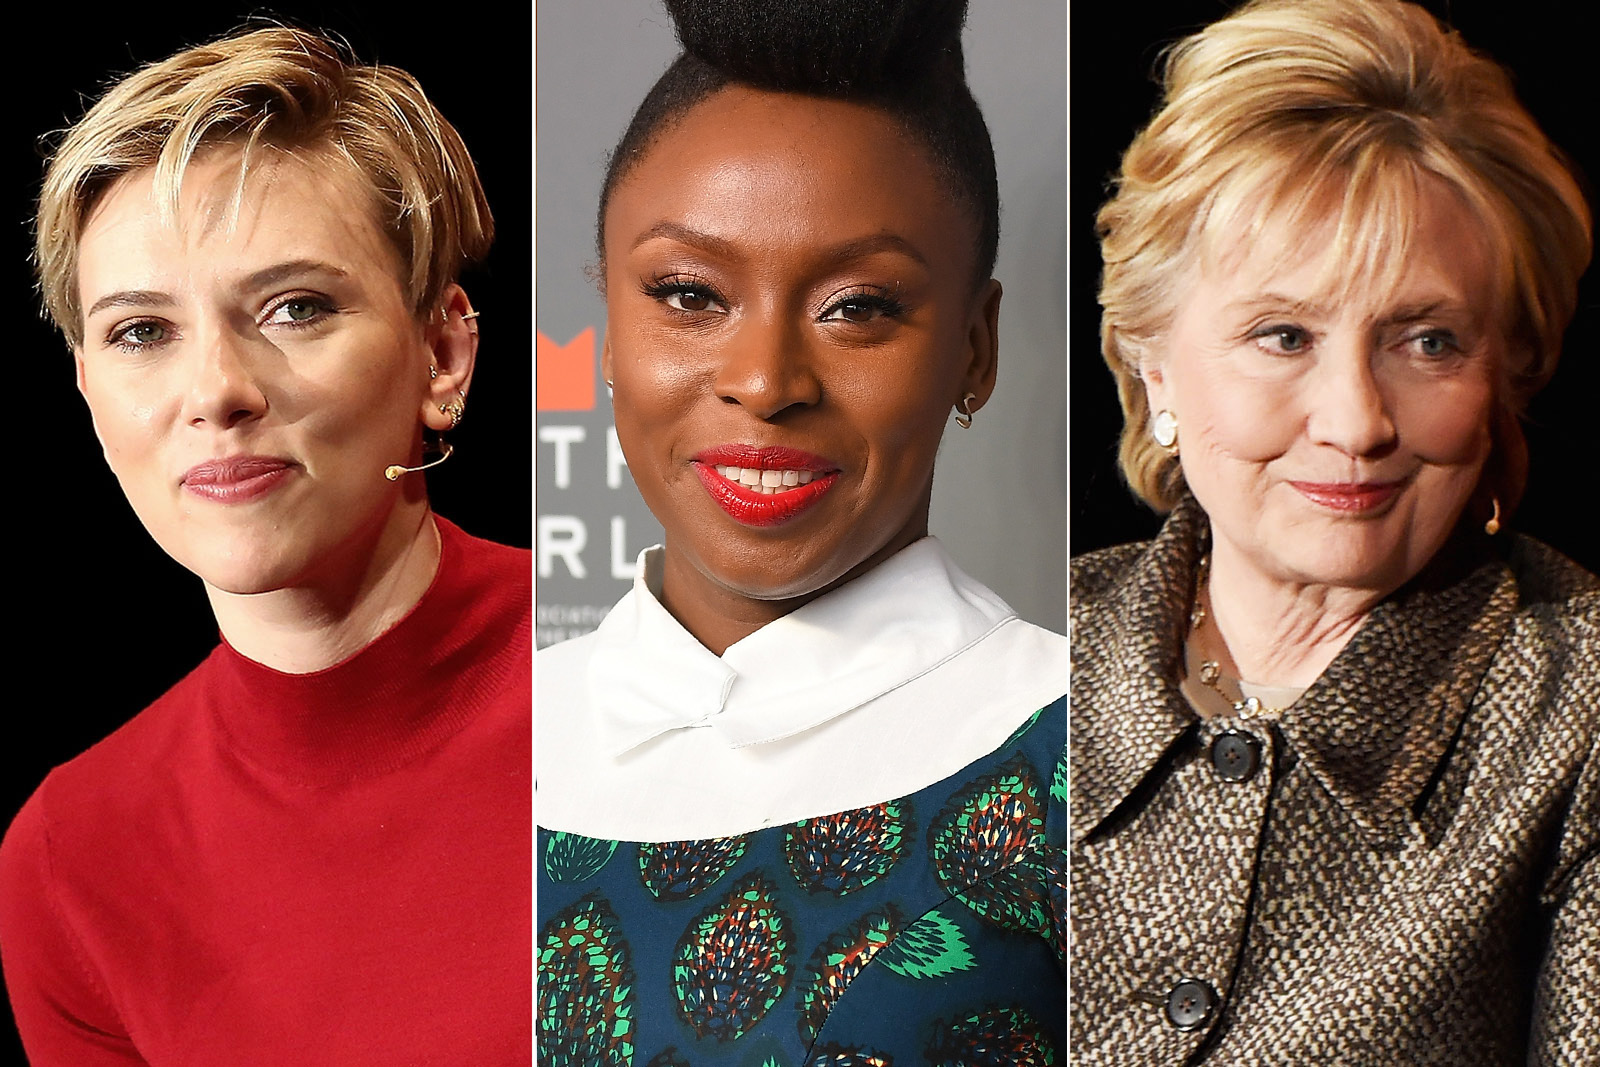 Monica Schipper—WireImage/Getty Images (L);  Angela Weiss—AFP/Getty Images (C); Monica Schipper—WireImage/Getty Images (Scarlett Johansson in New York City on April 6, 2017 (L); Chimamanda Ngozi Adichie in New York City on April 5, 2017 (C); Hillary Clinton in New York City on April 6, 2017.)